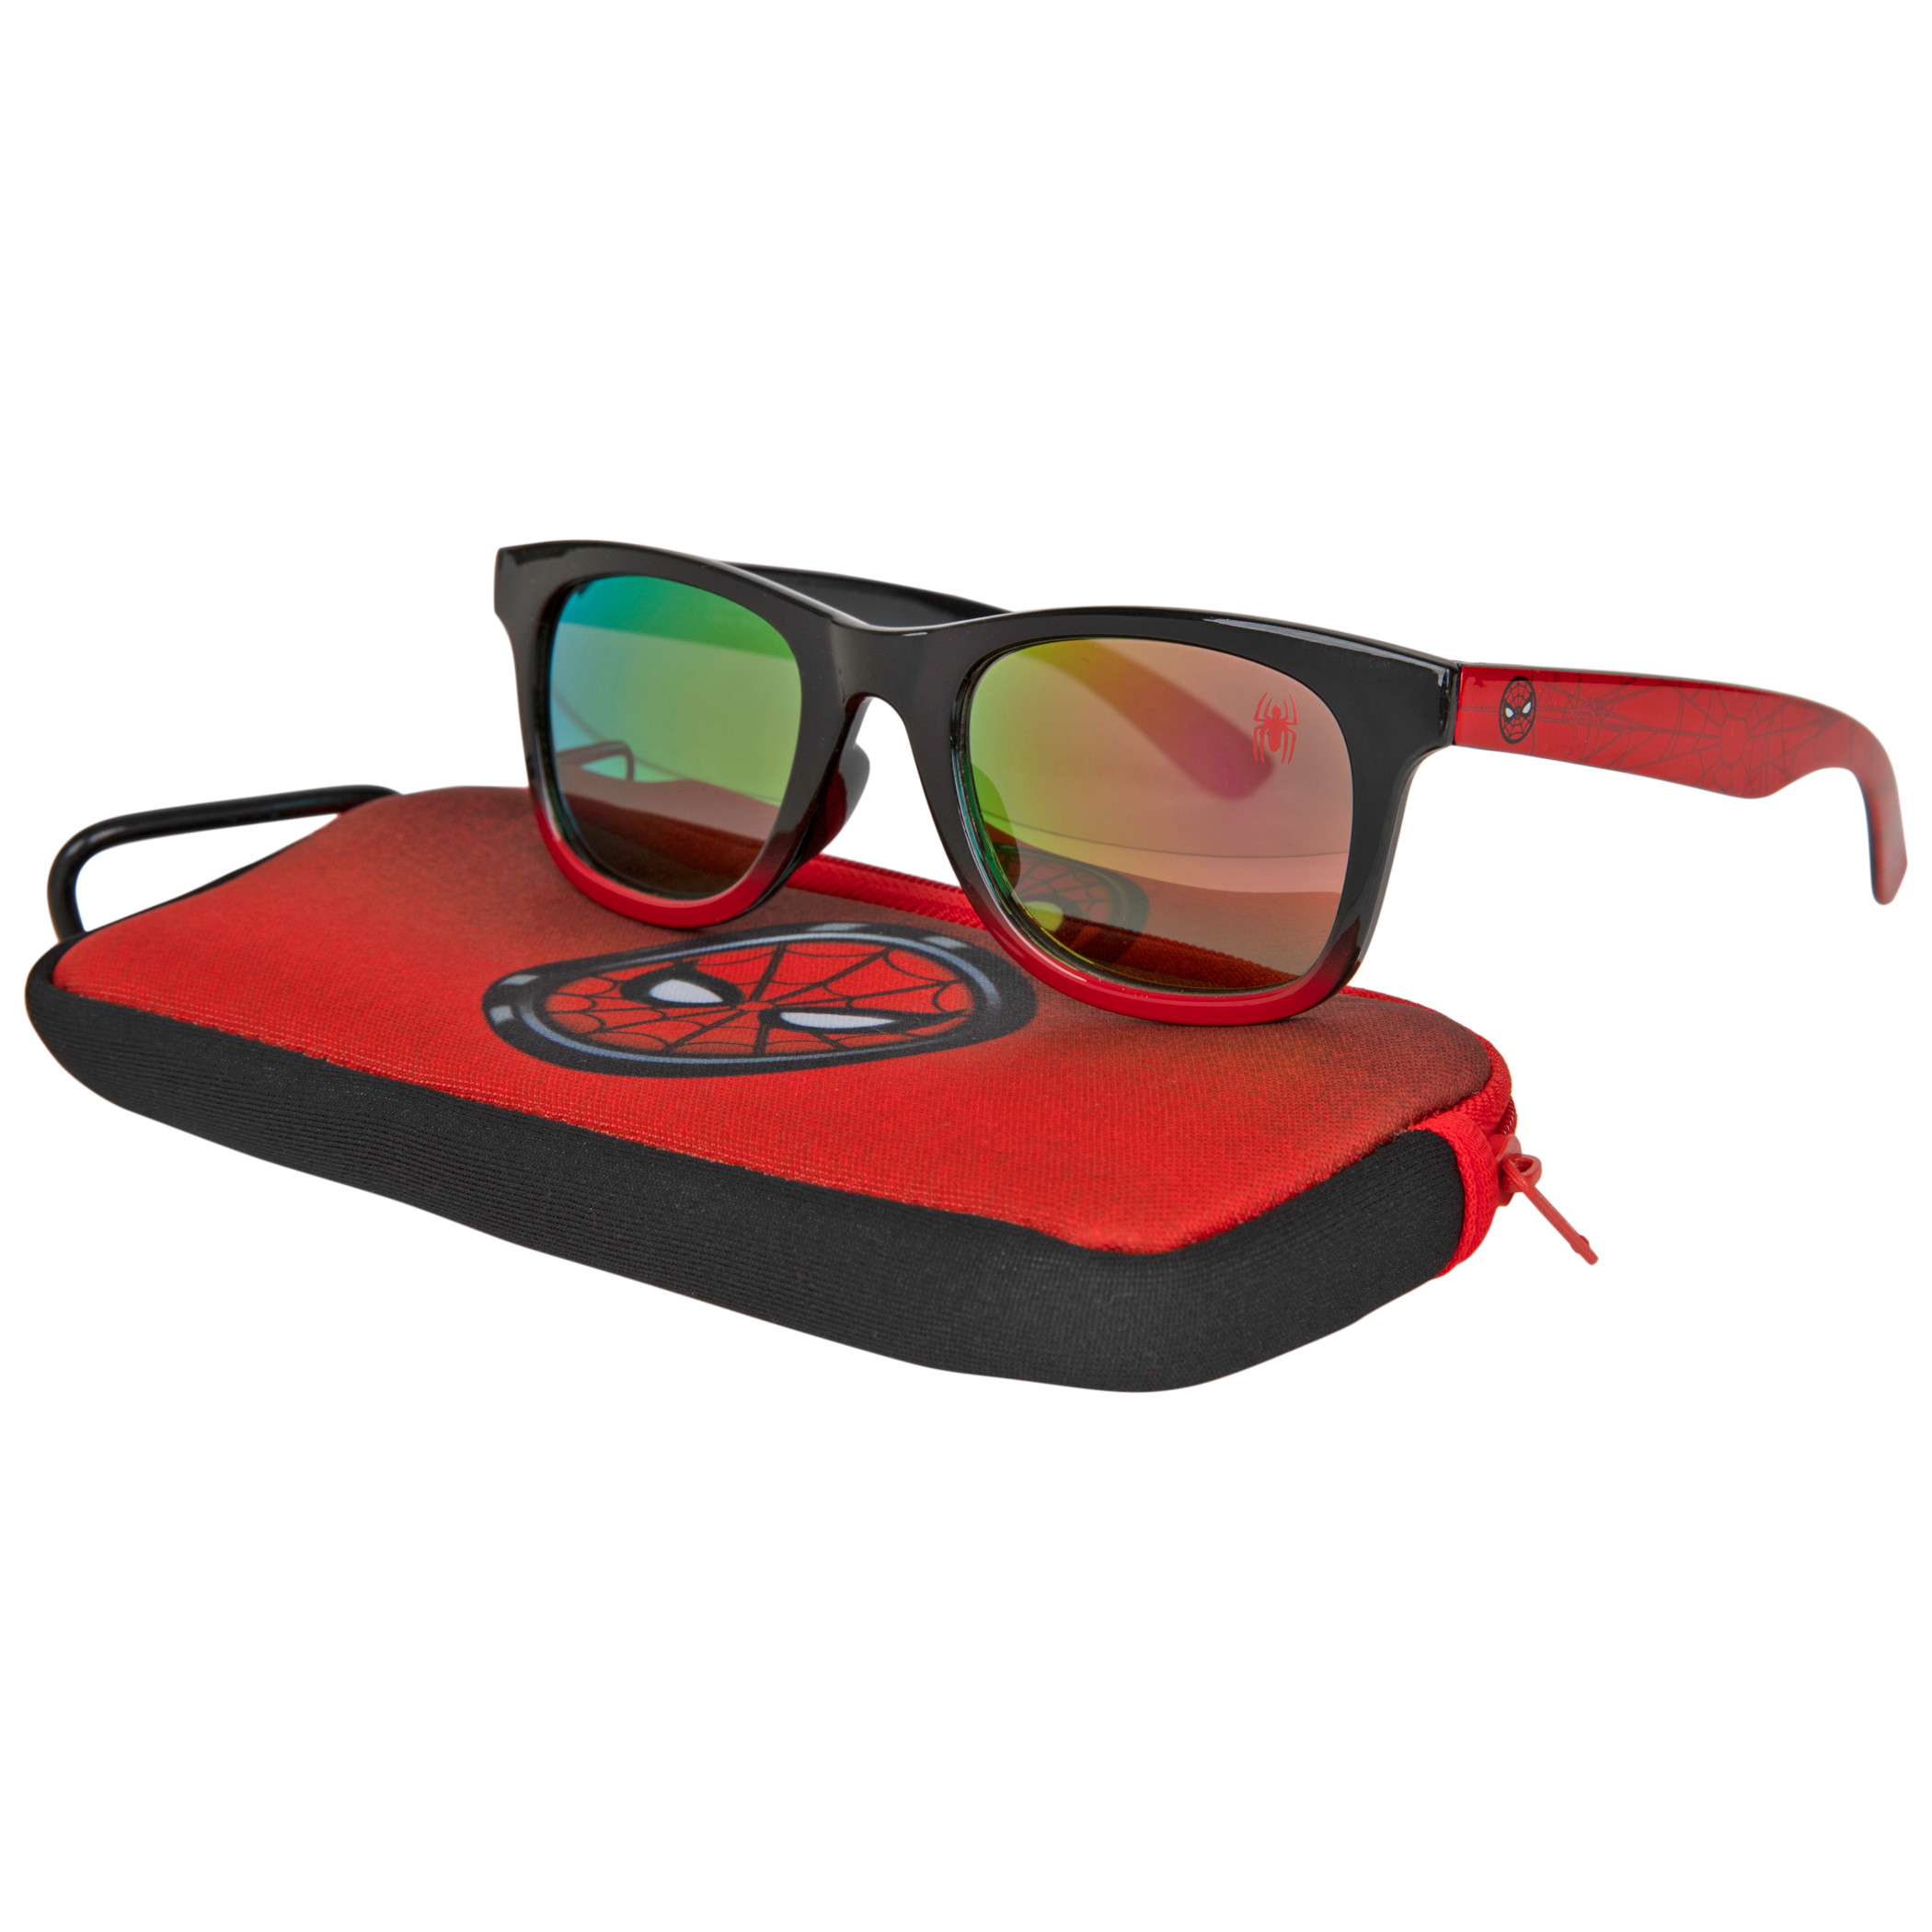 Marvel Comics Spider-Man Logo Kids Sunglasses with Carabiner Pouch